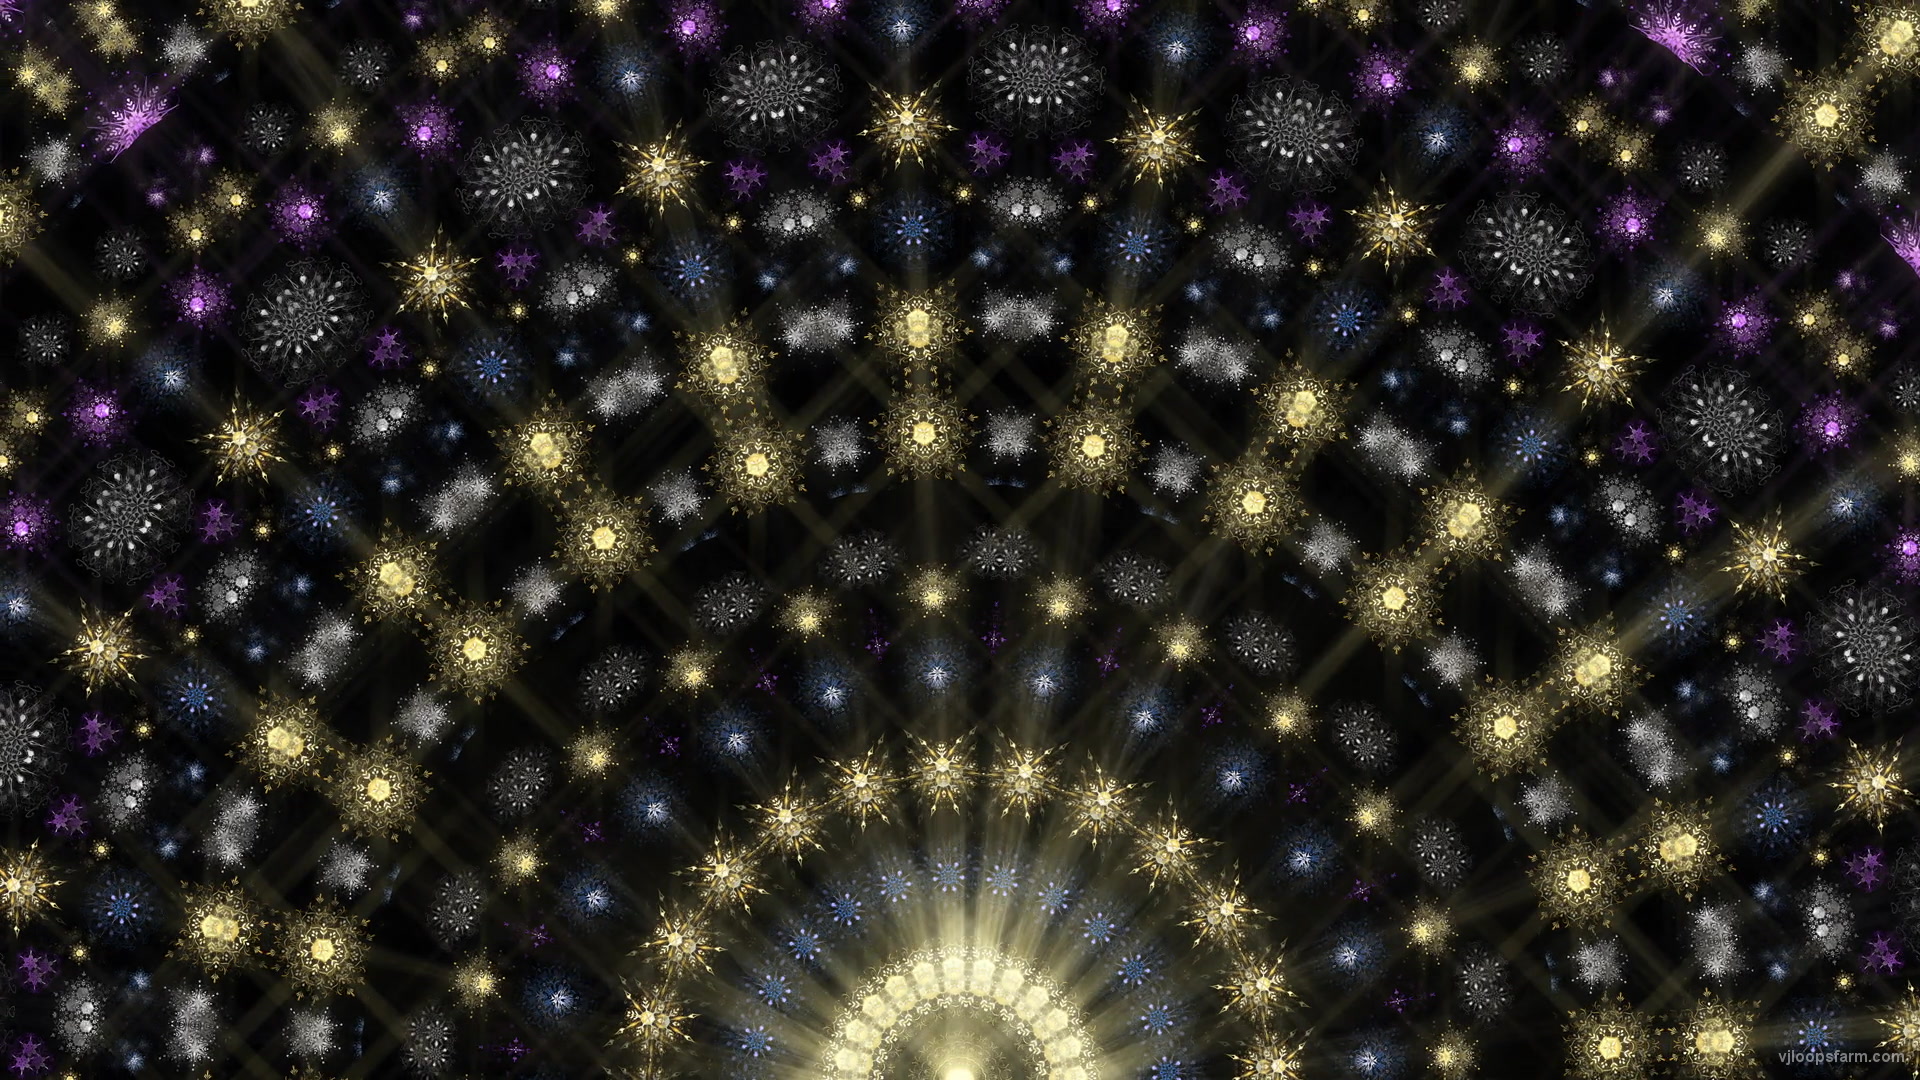 Radial Rotation Snowflake pattern in gold-blue-pink stars with rays Ultra HD VJ Loop